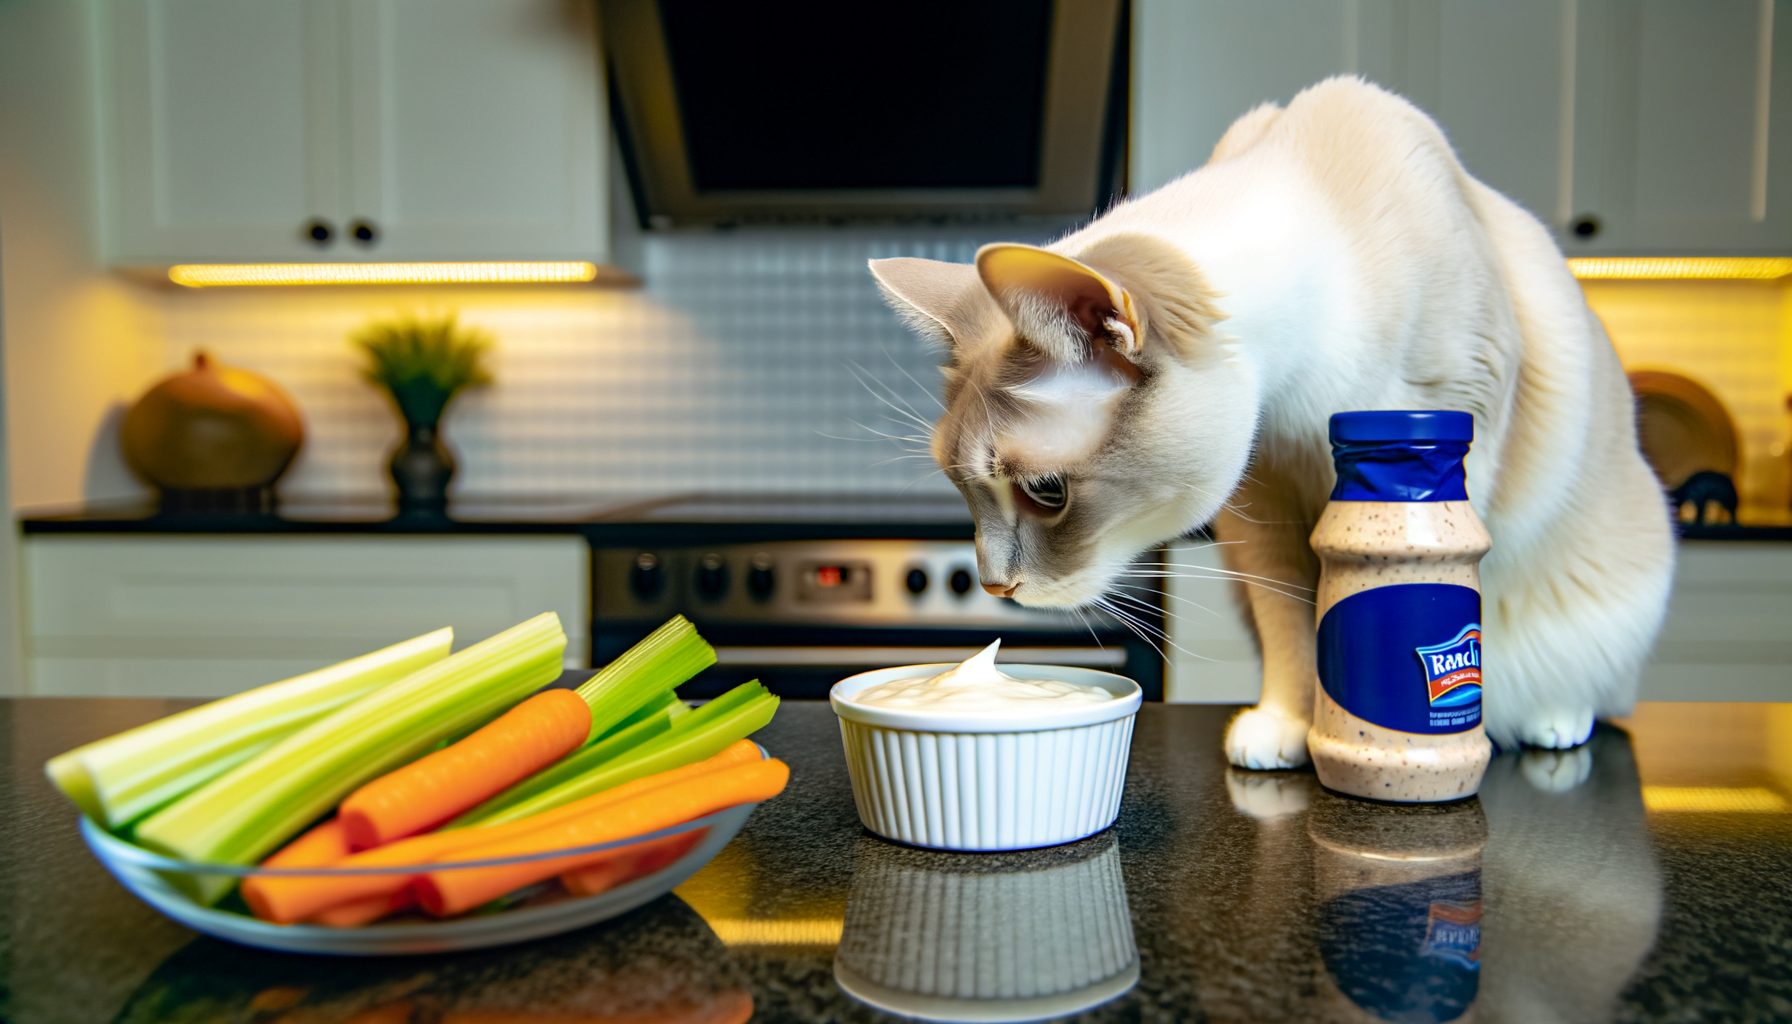 "Decoding Feline Diets: Can Cats Safely Enjoy Ranch Dressing?"